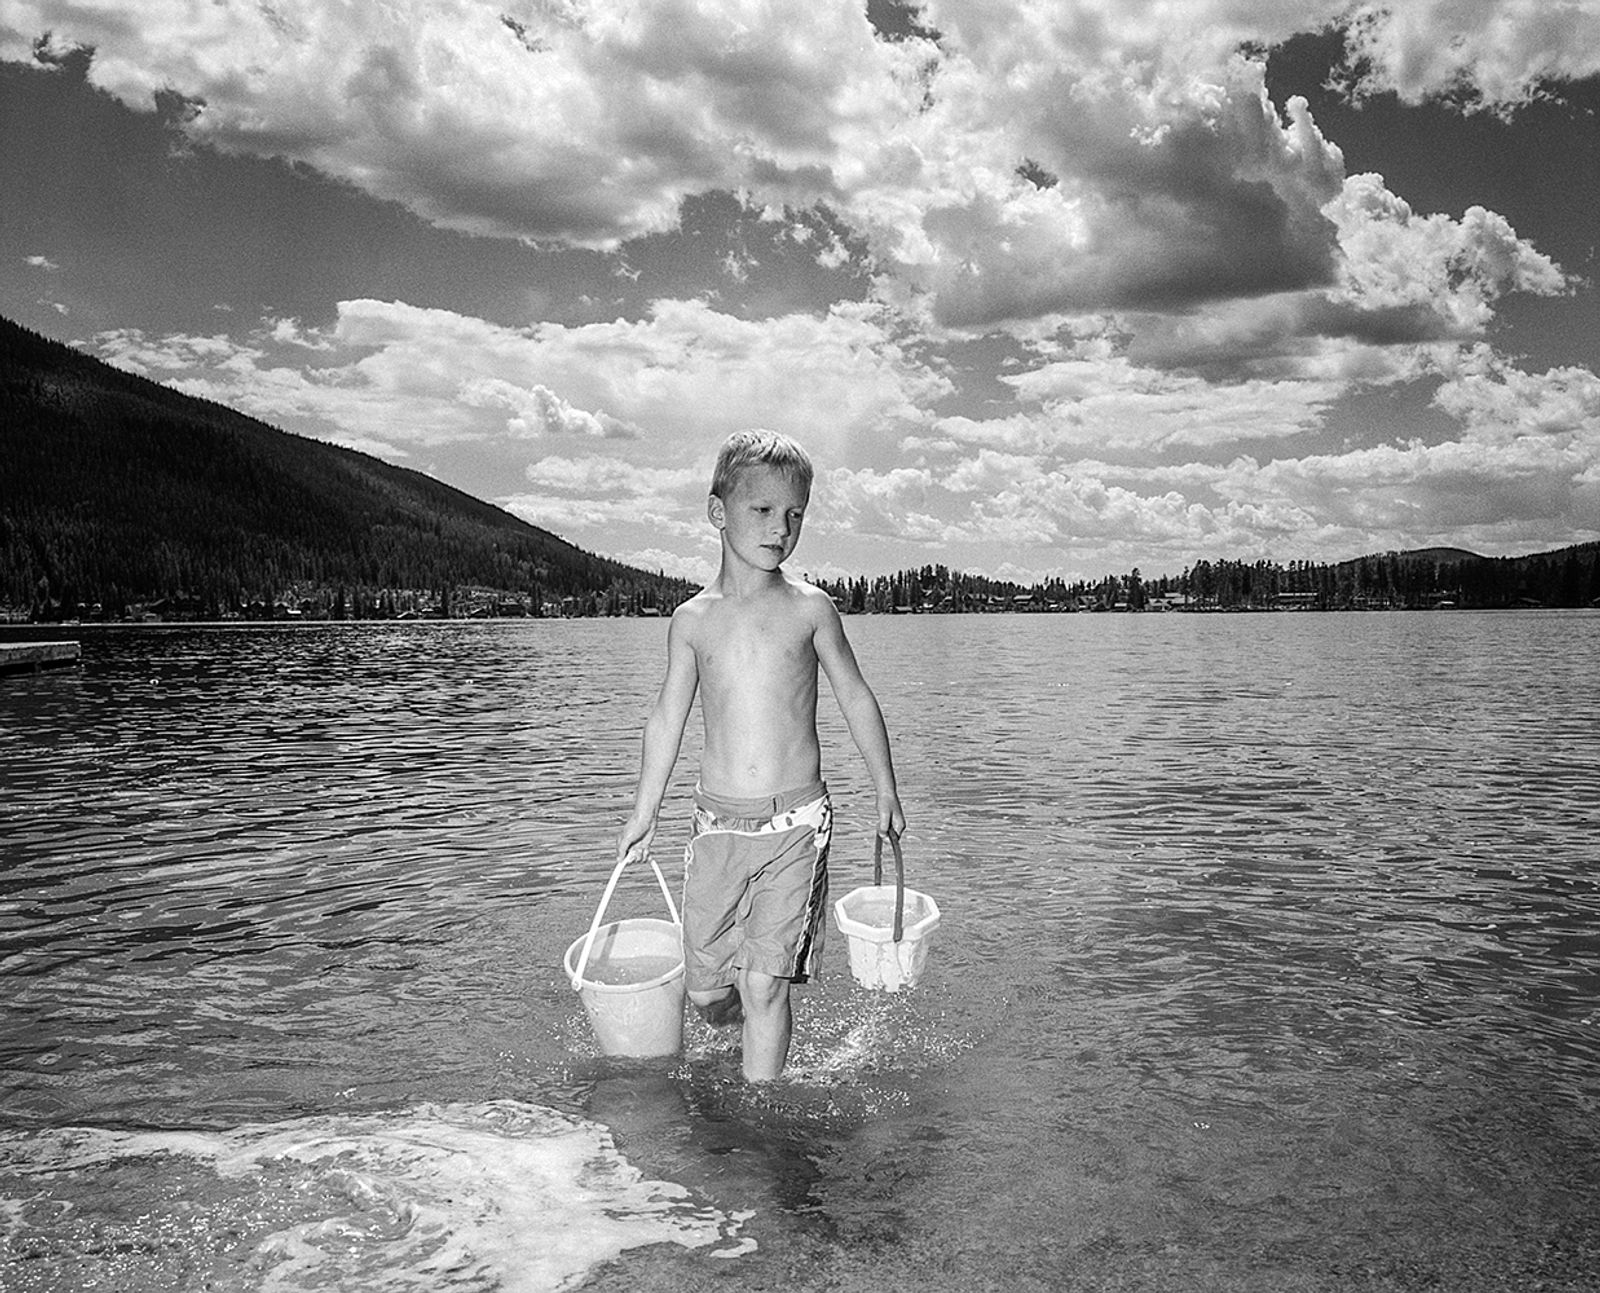 © John Trotter - Image from the No Agua, No Vida: The human alteration of the Colorado River photography project